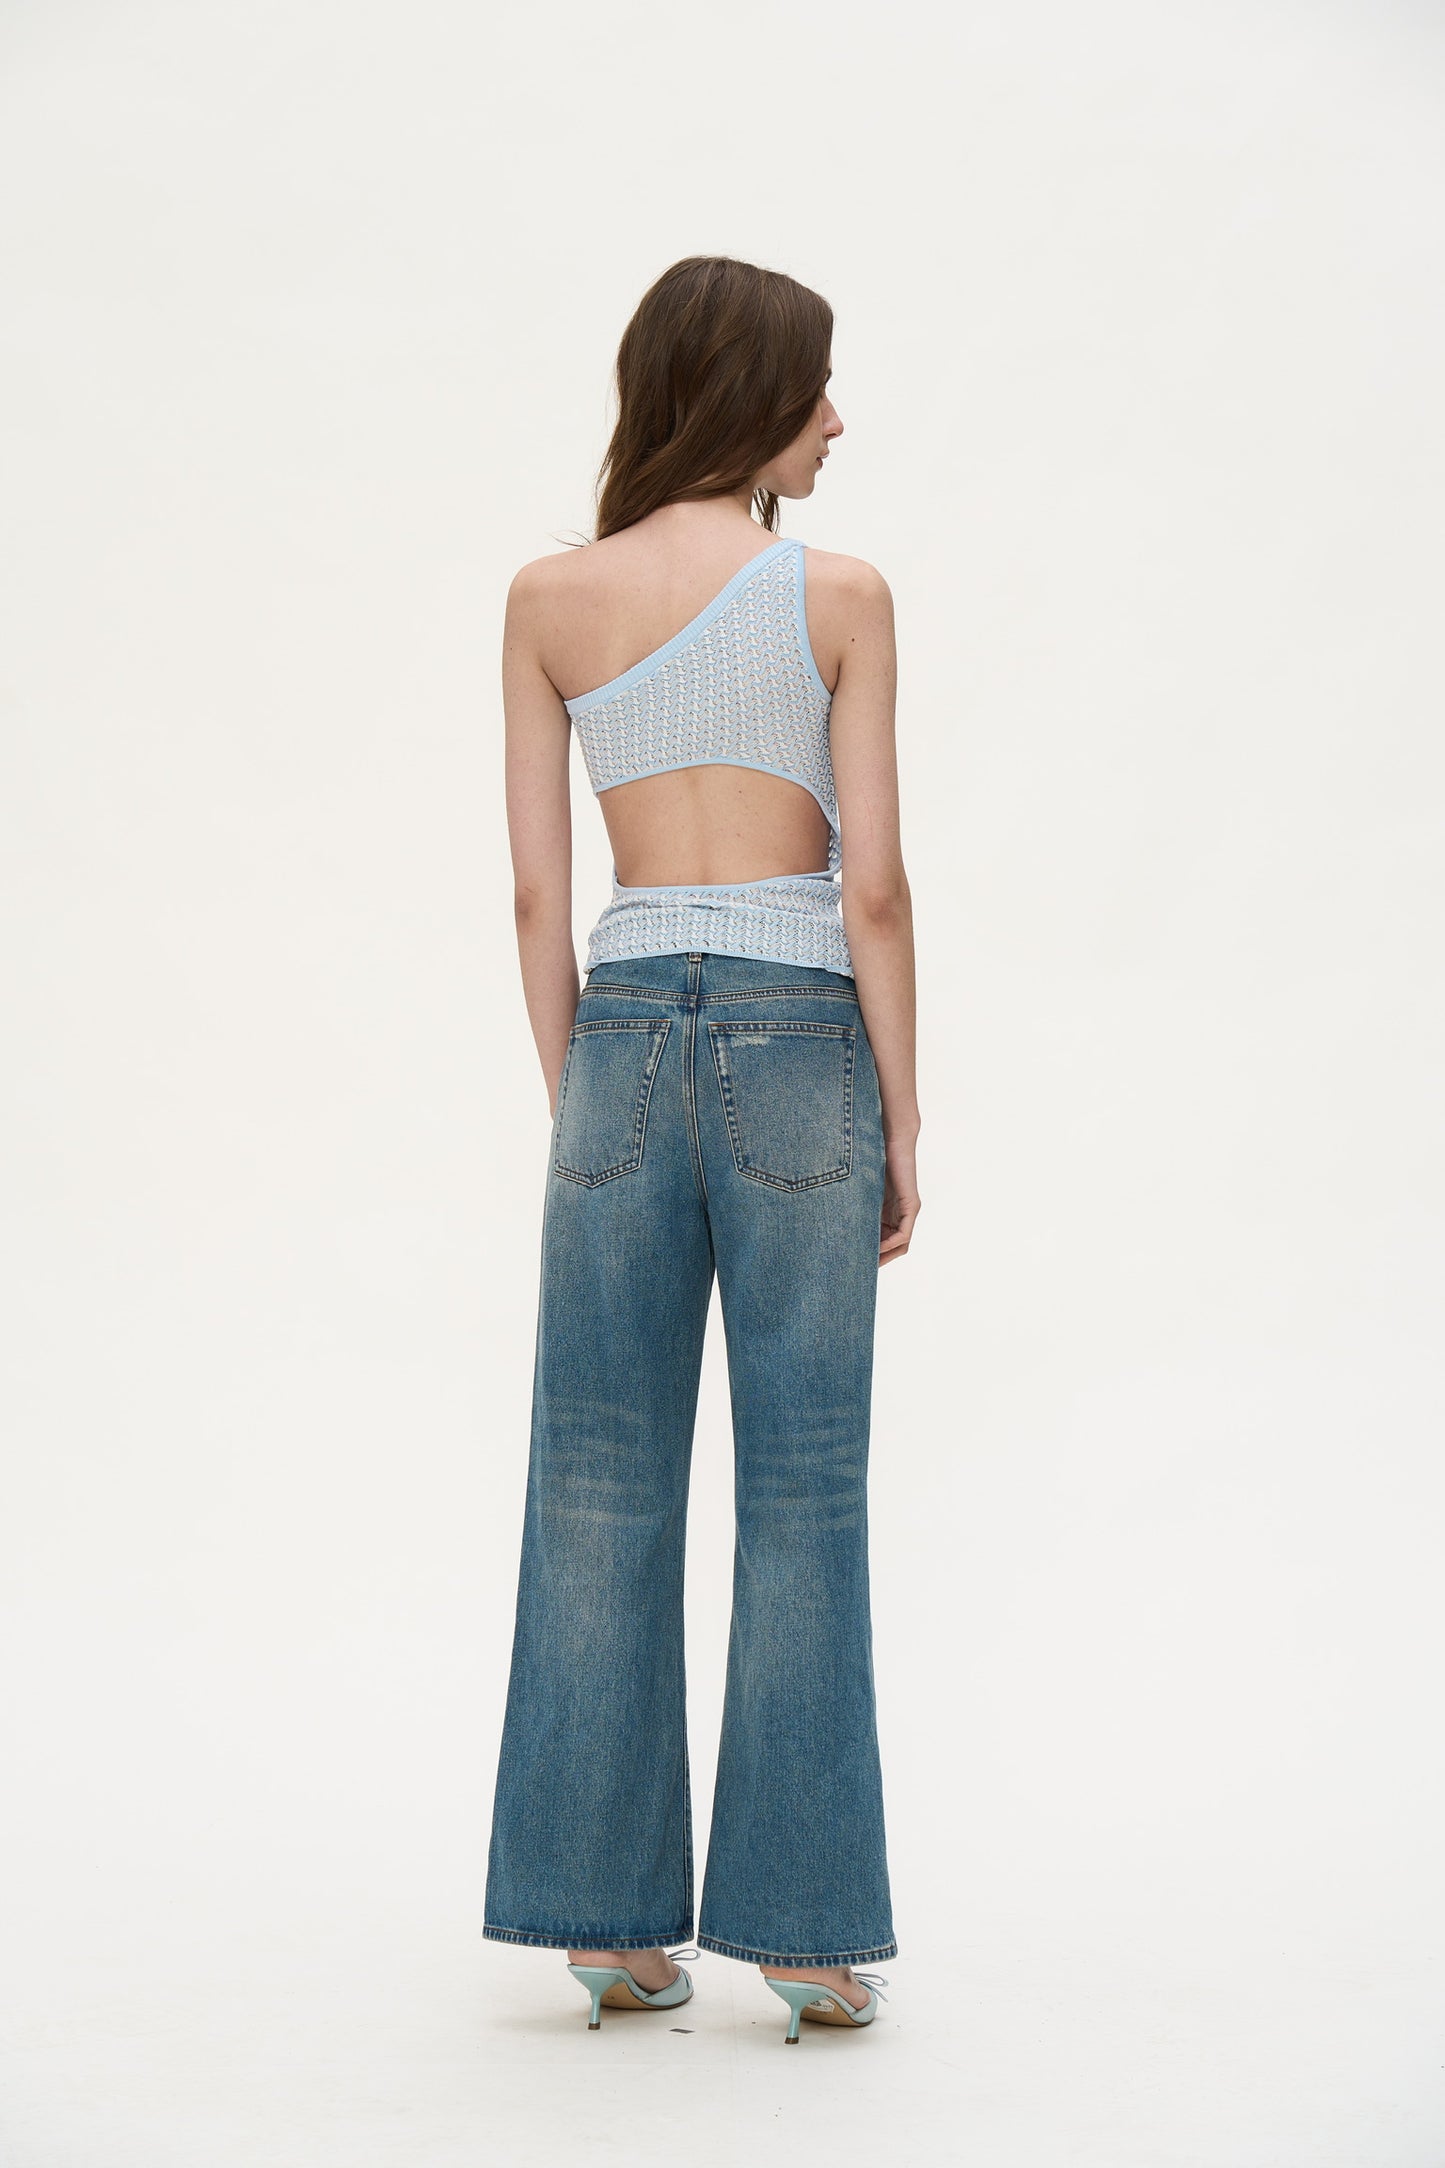 Junie Backless Knit Top in Blue